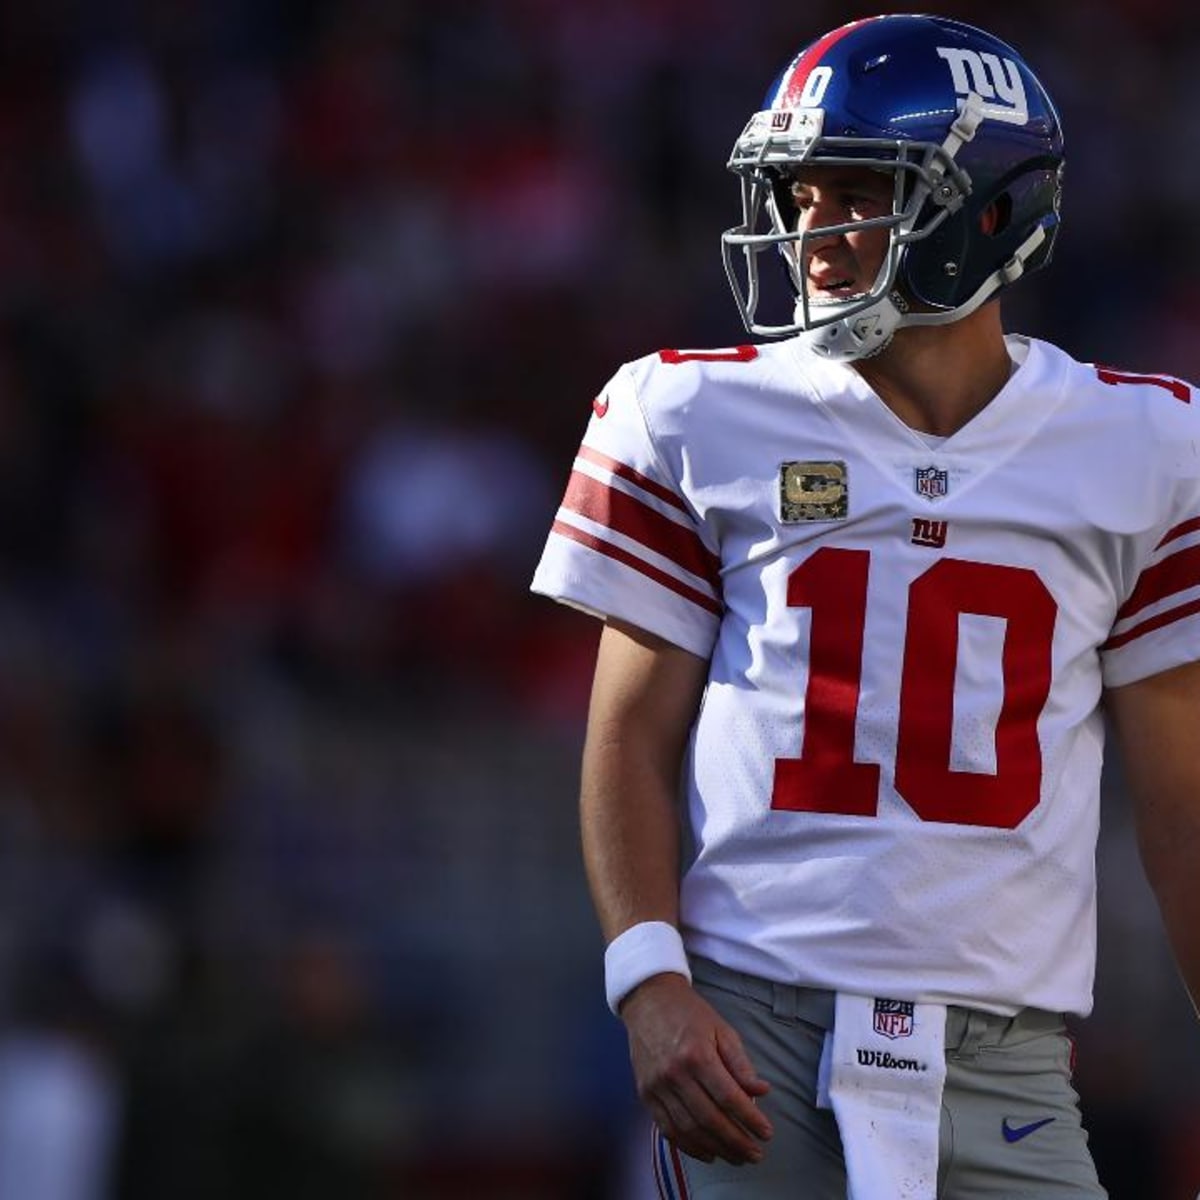 Where do the Giants go from here?